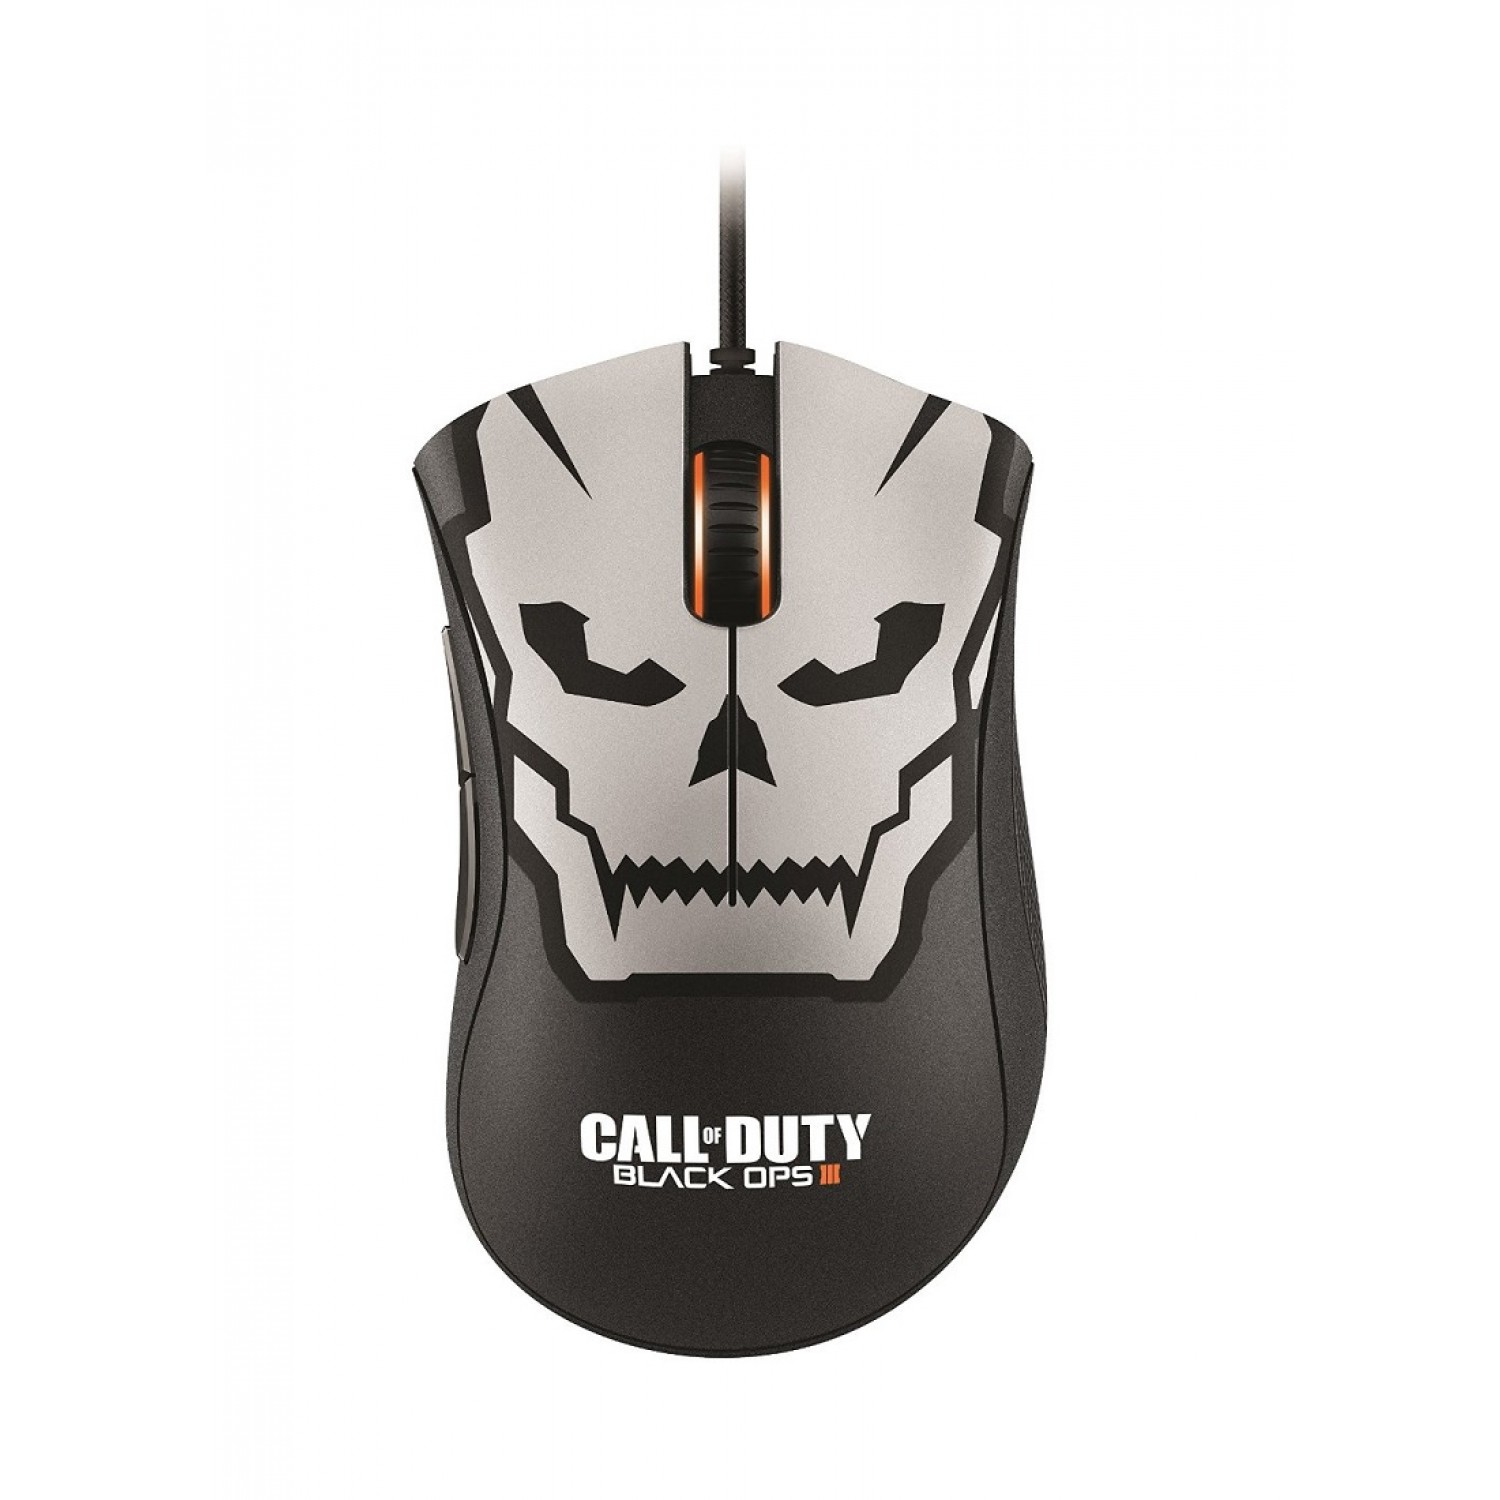 Razer Deathadder Call of Duty Chroma Gaming Mouse